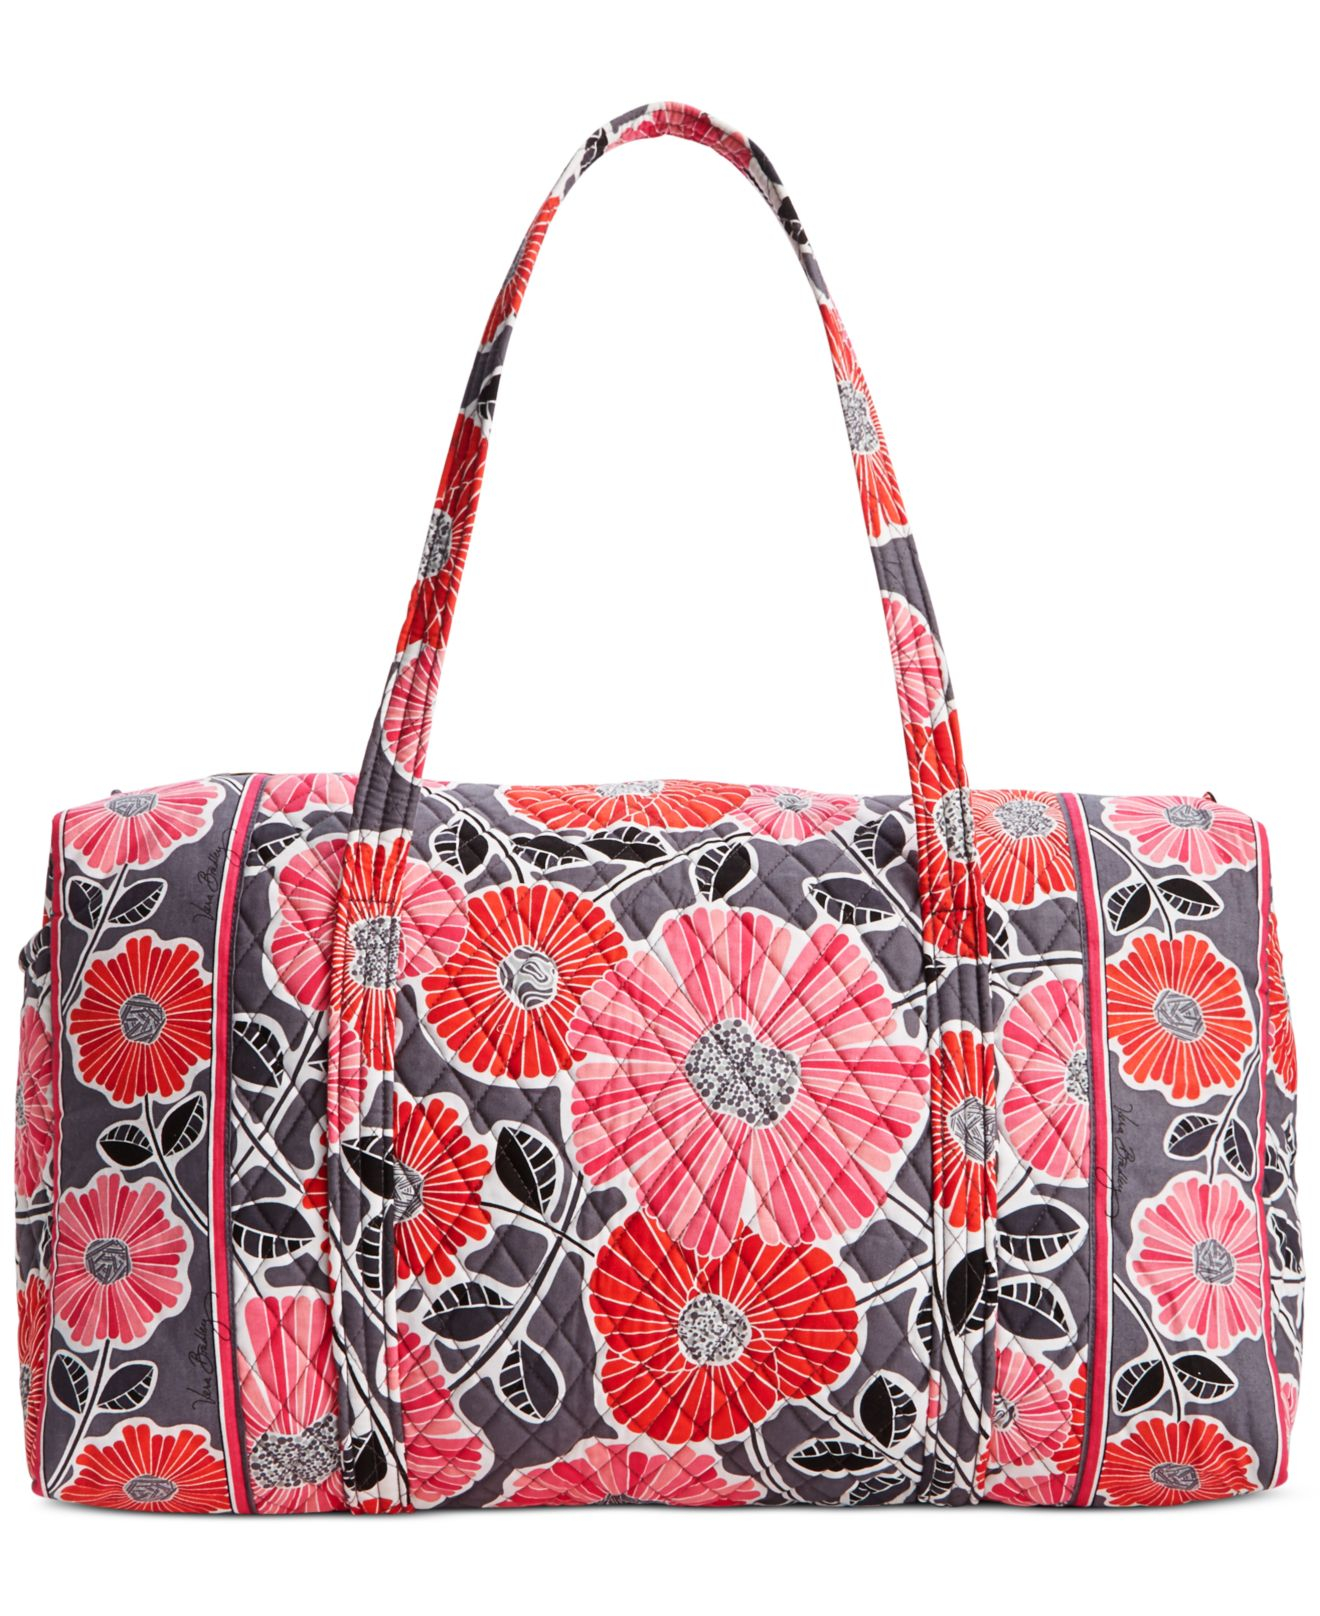 Vera Bradley Cotton Large Duffle Bag in Red - Lyst